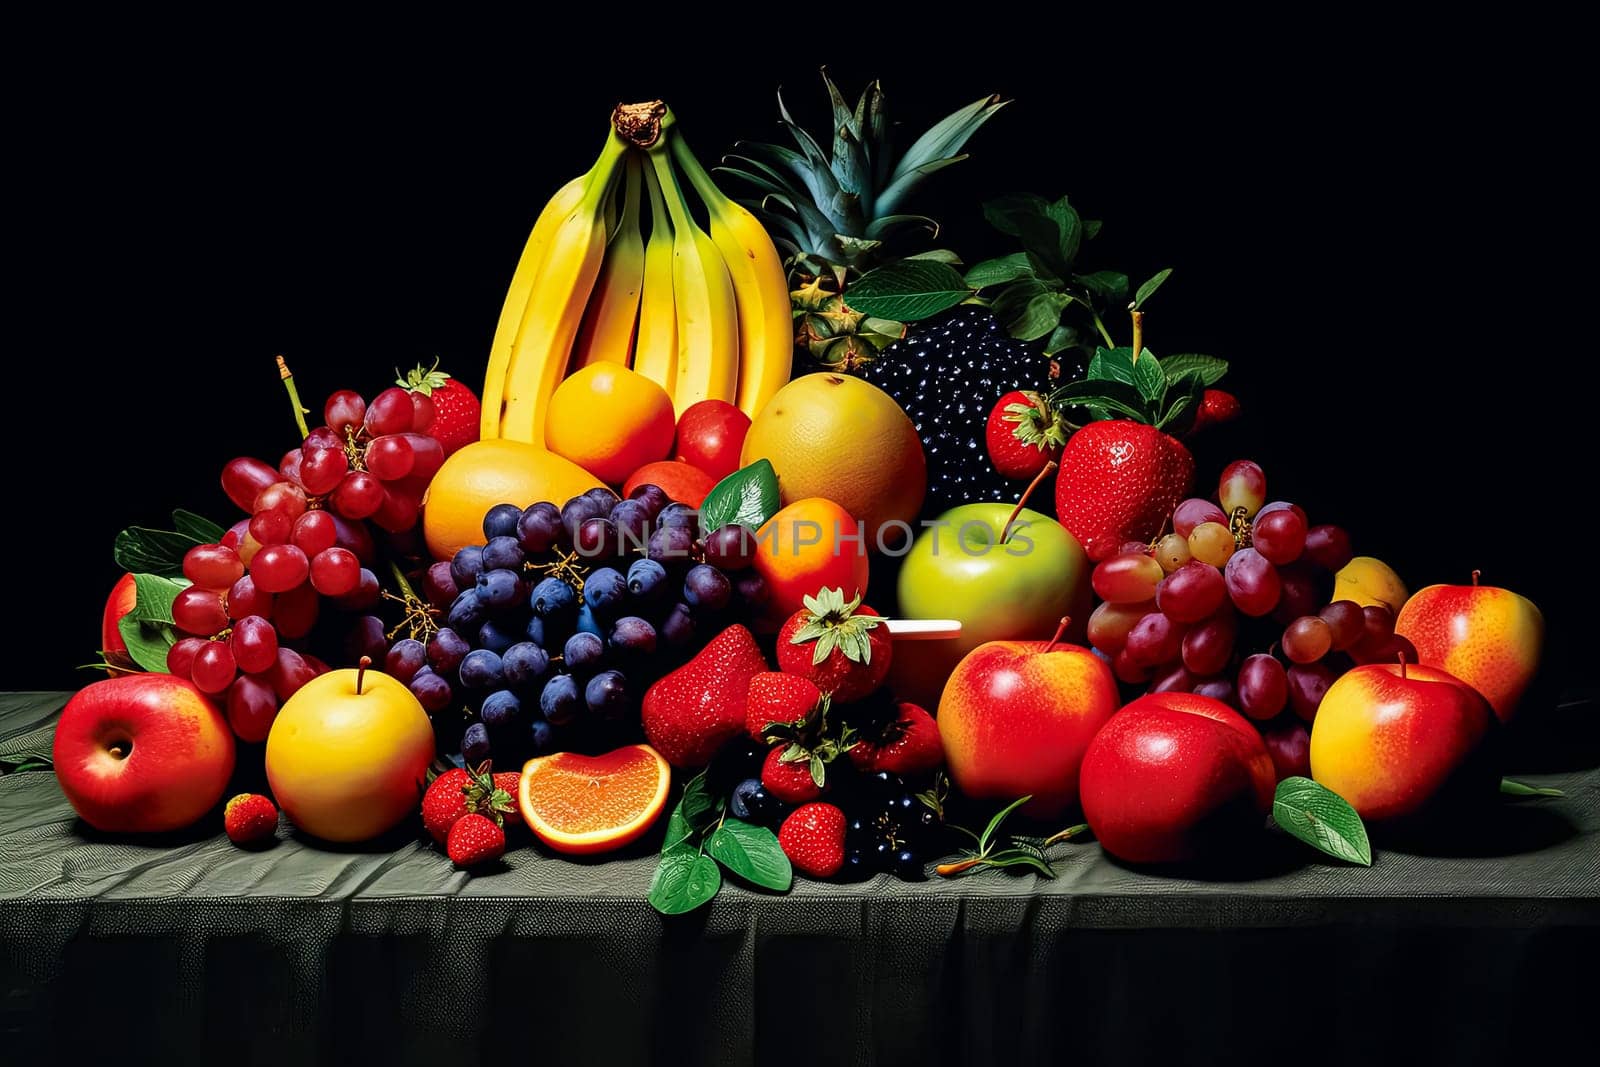 A table full of fruit including apples, oranges, bananas, and grapes. Concept of abundance and freshness